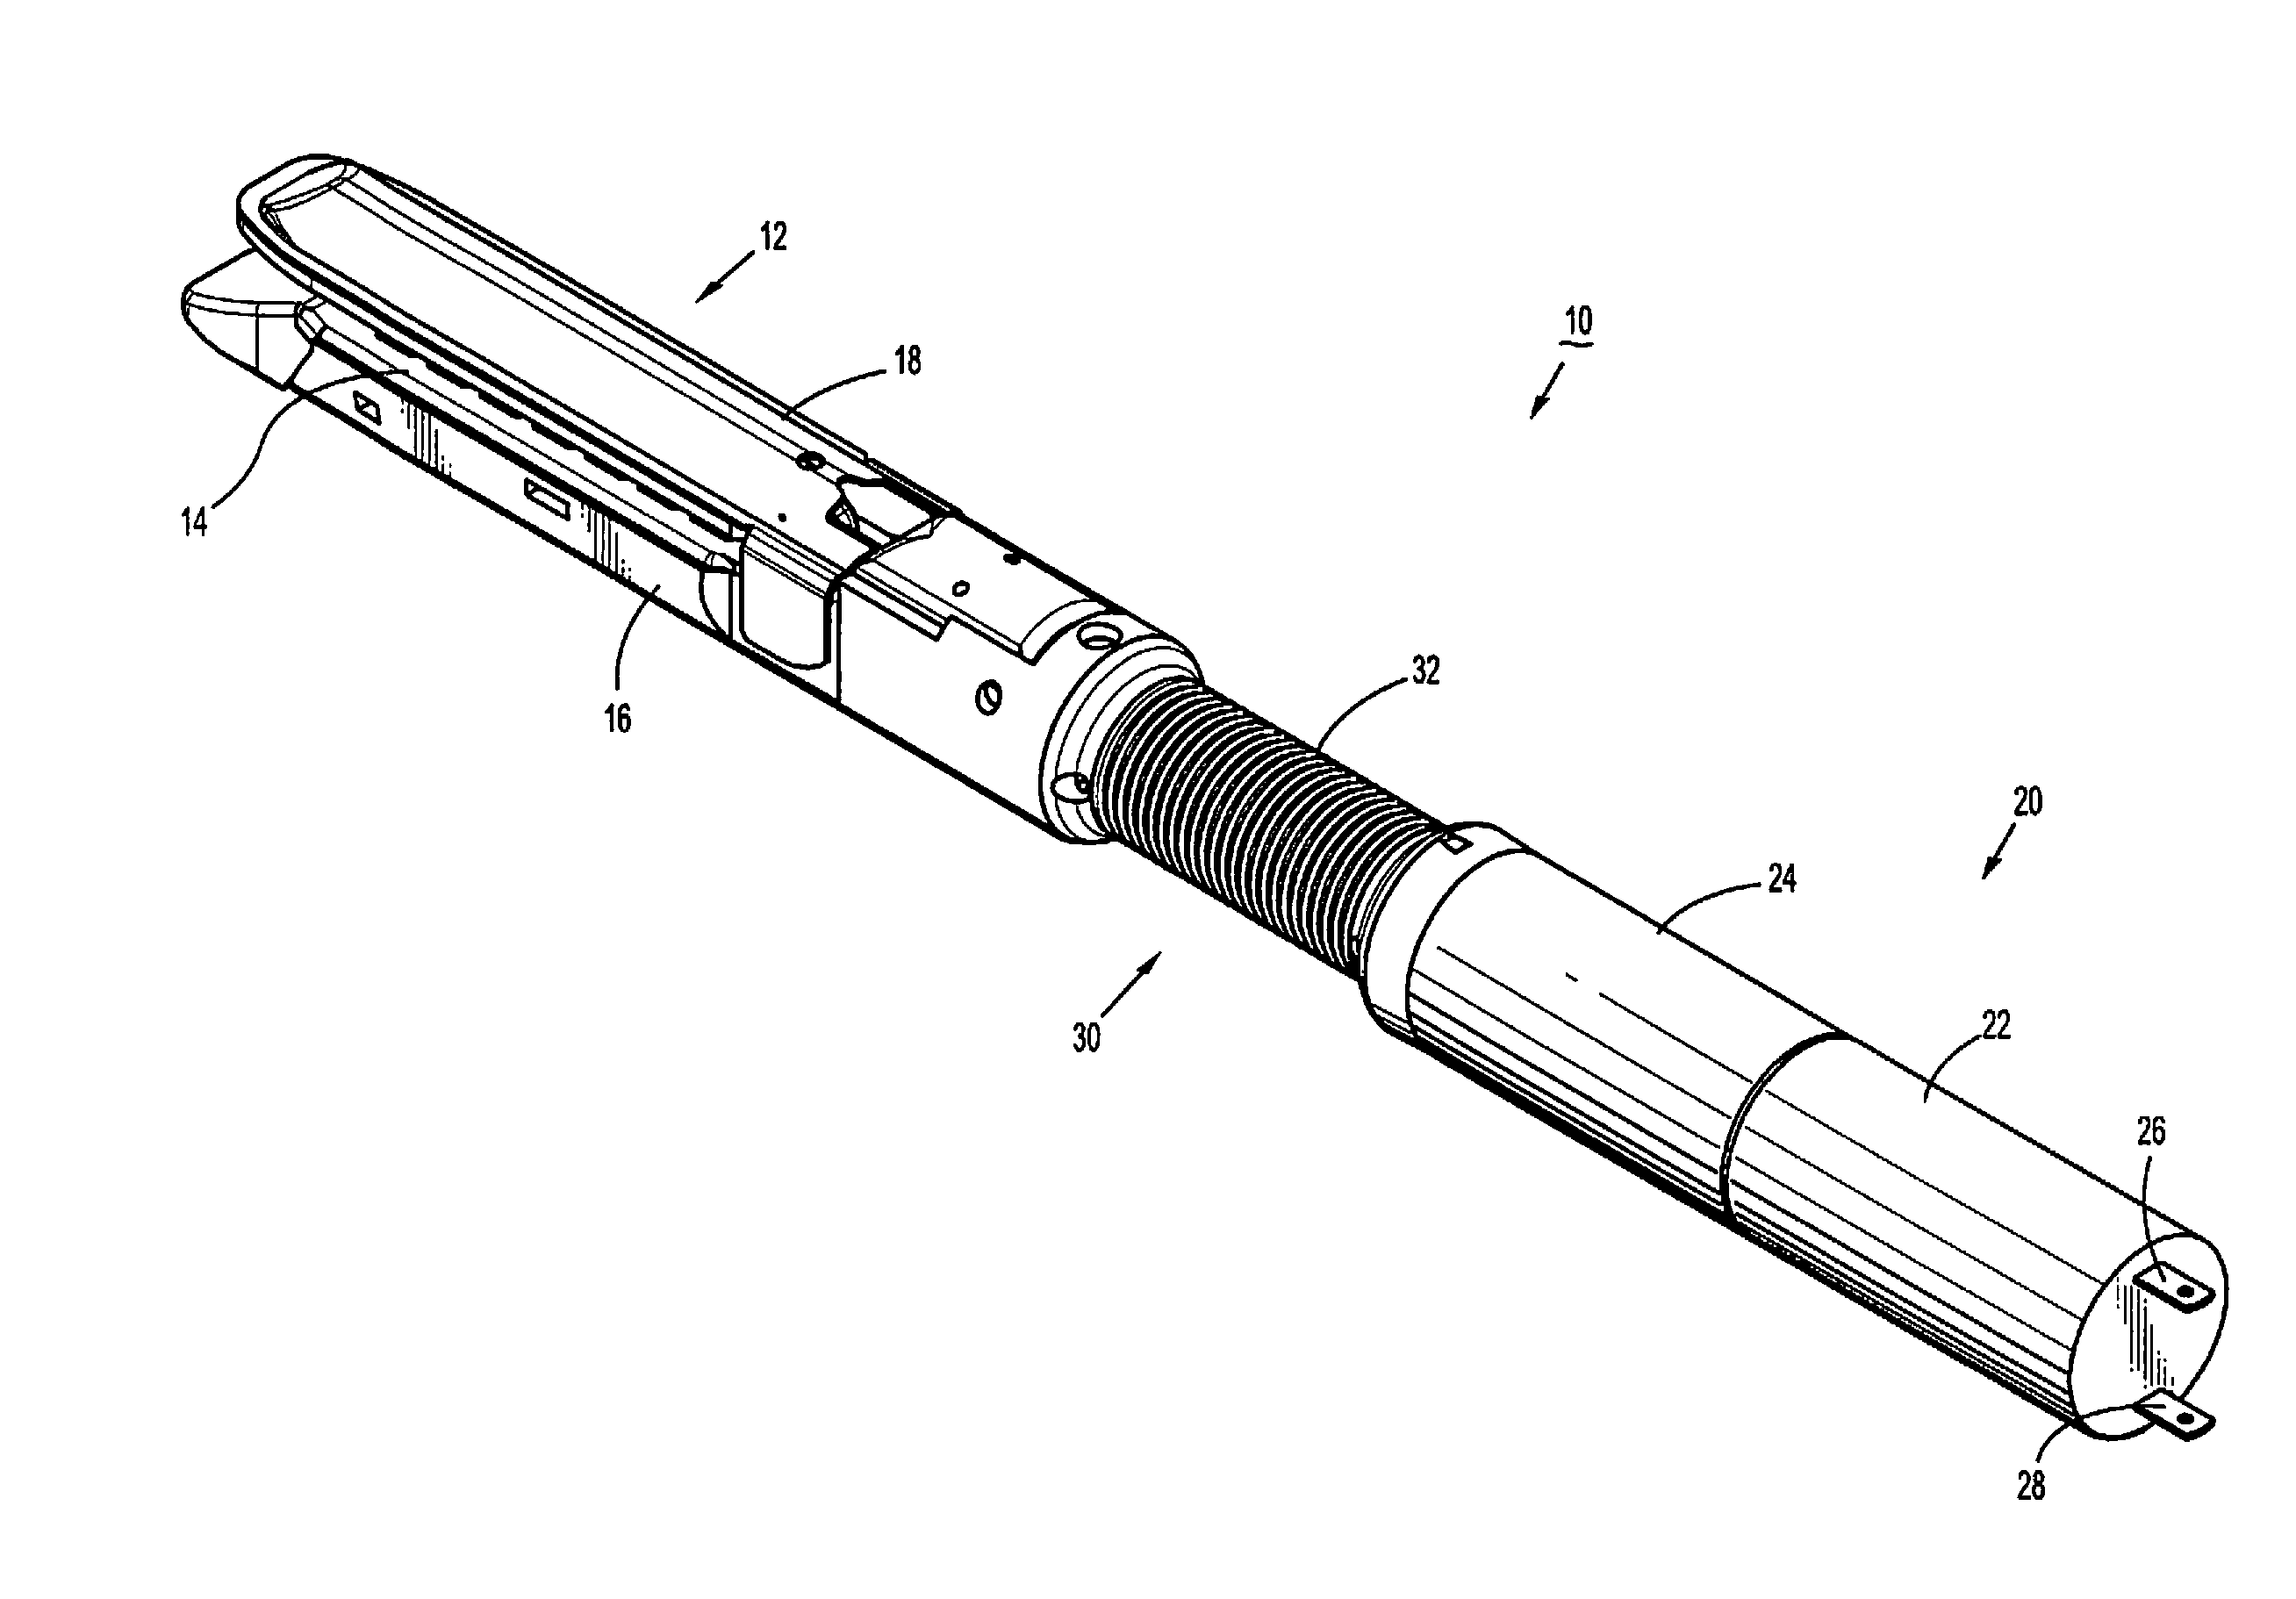 Flexible surgical stapler with motor in the head